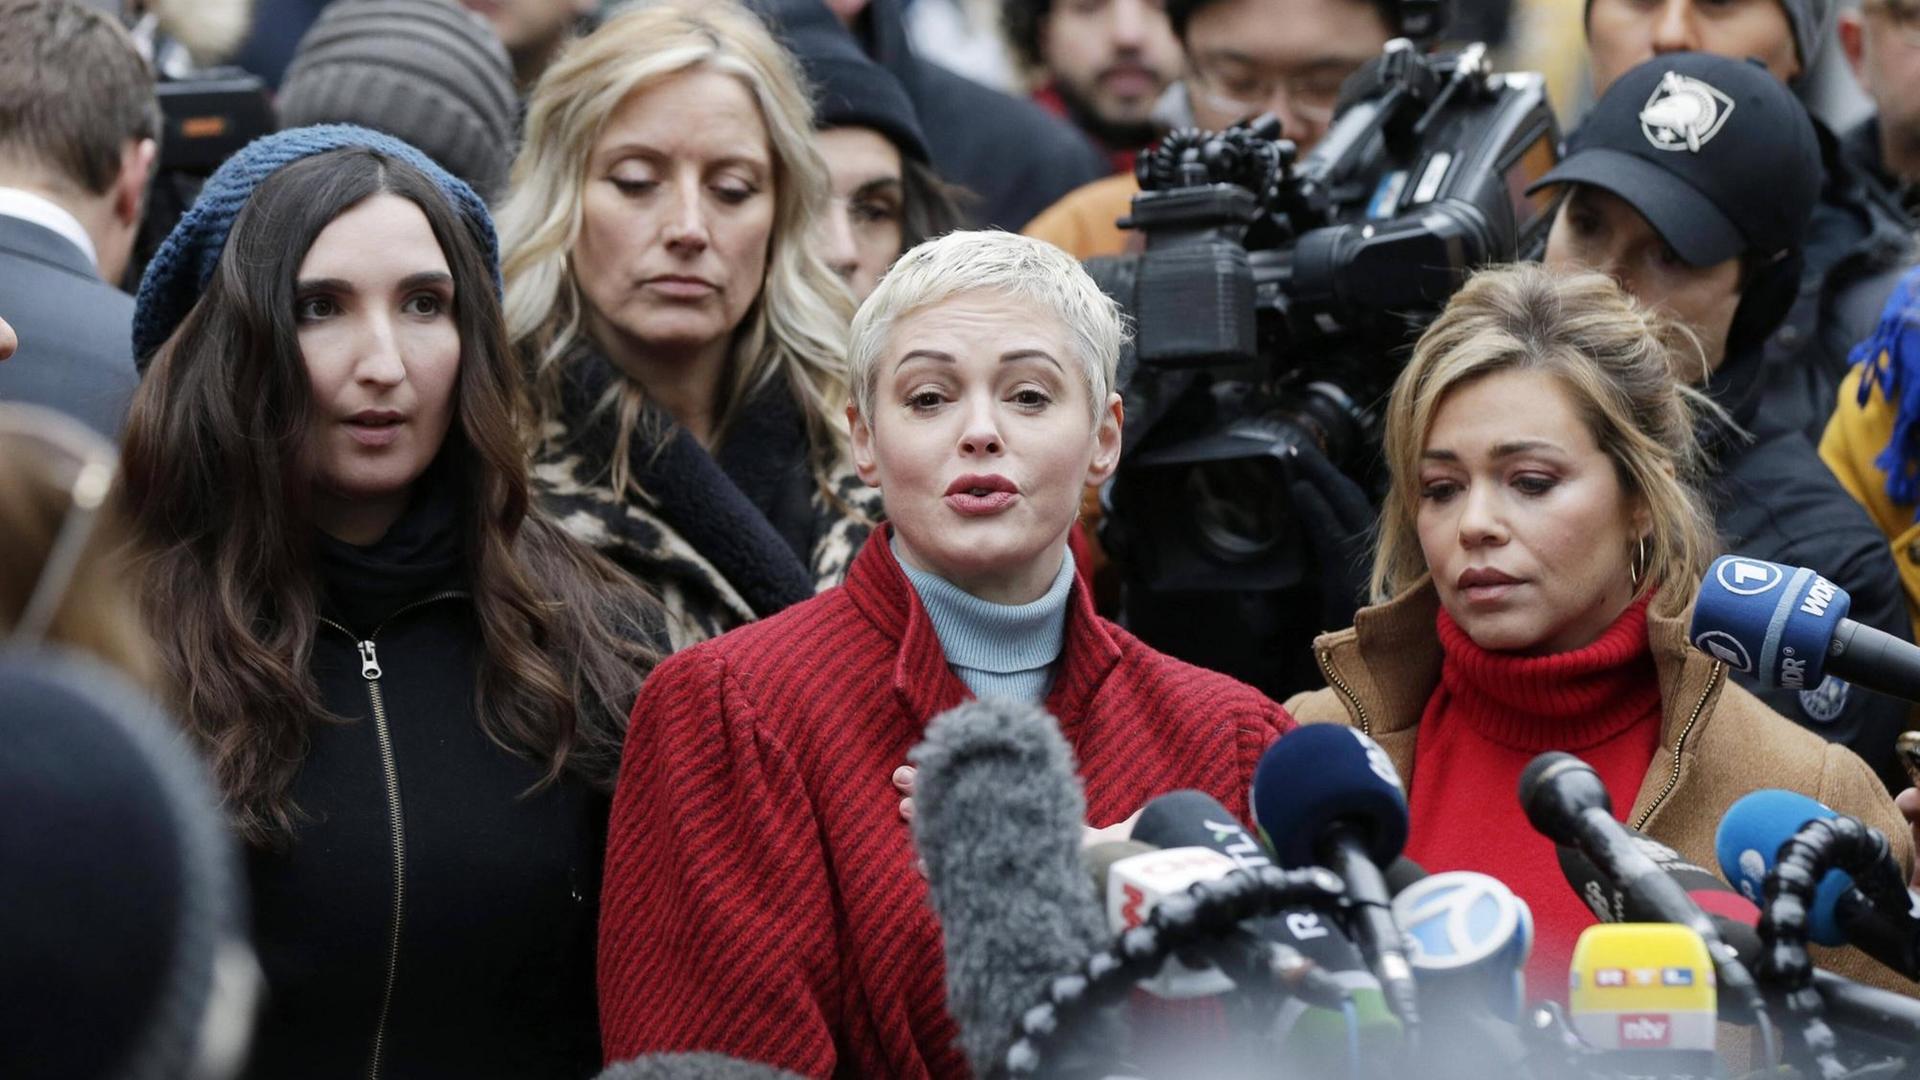 Rose McGowan and other accusers hold a press conference after American film producer Harvey Weinstein arrives at Manhattan Court before the start of his sexual misconduct trial on Monday, January 6, 2020 in New York City. Harvey Weinstein is scheduled to stand trial on rape charges. The criminal trial is expected to begin with jury selection on Tuesday.